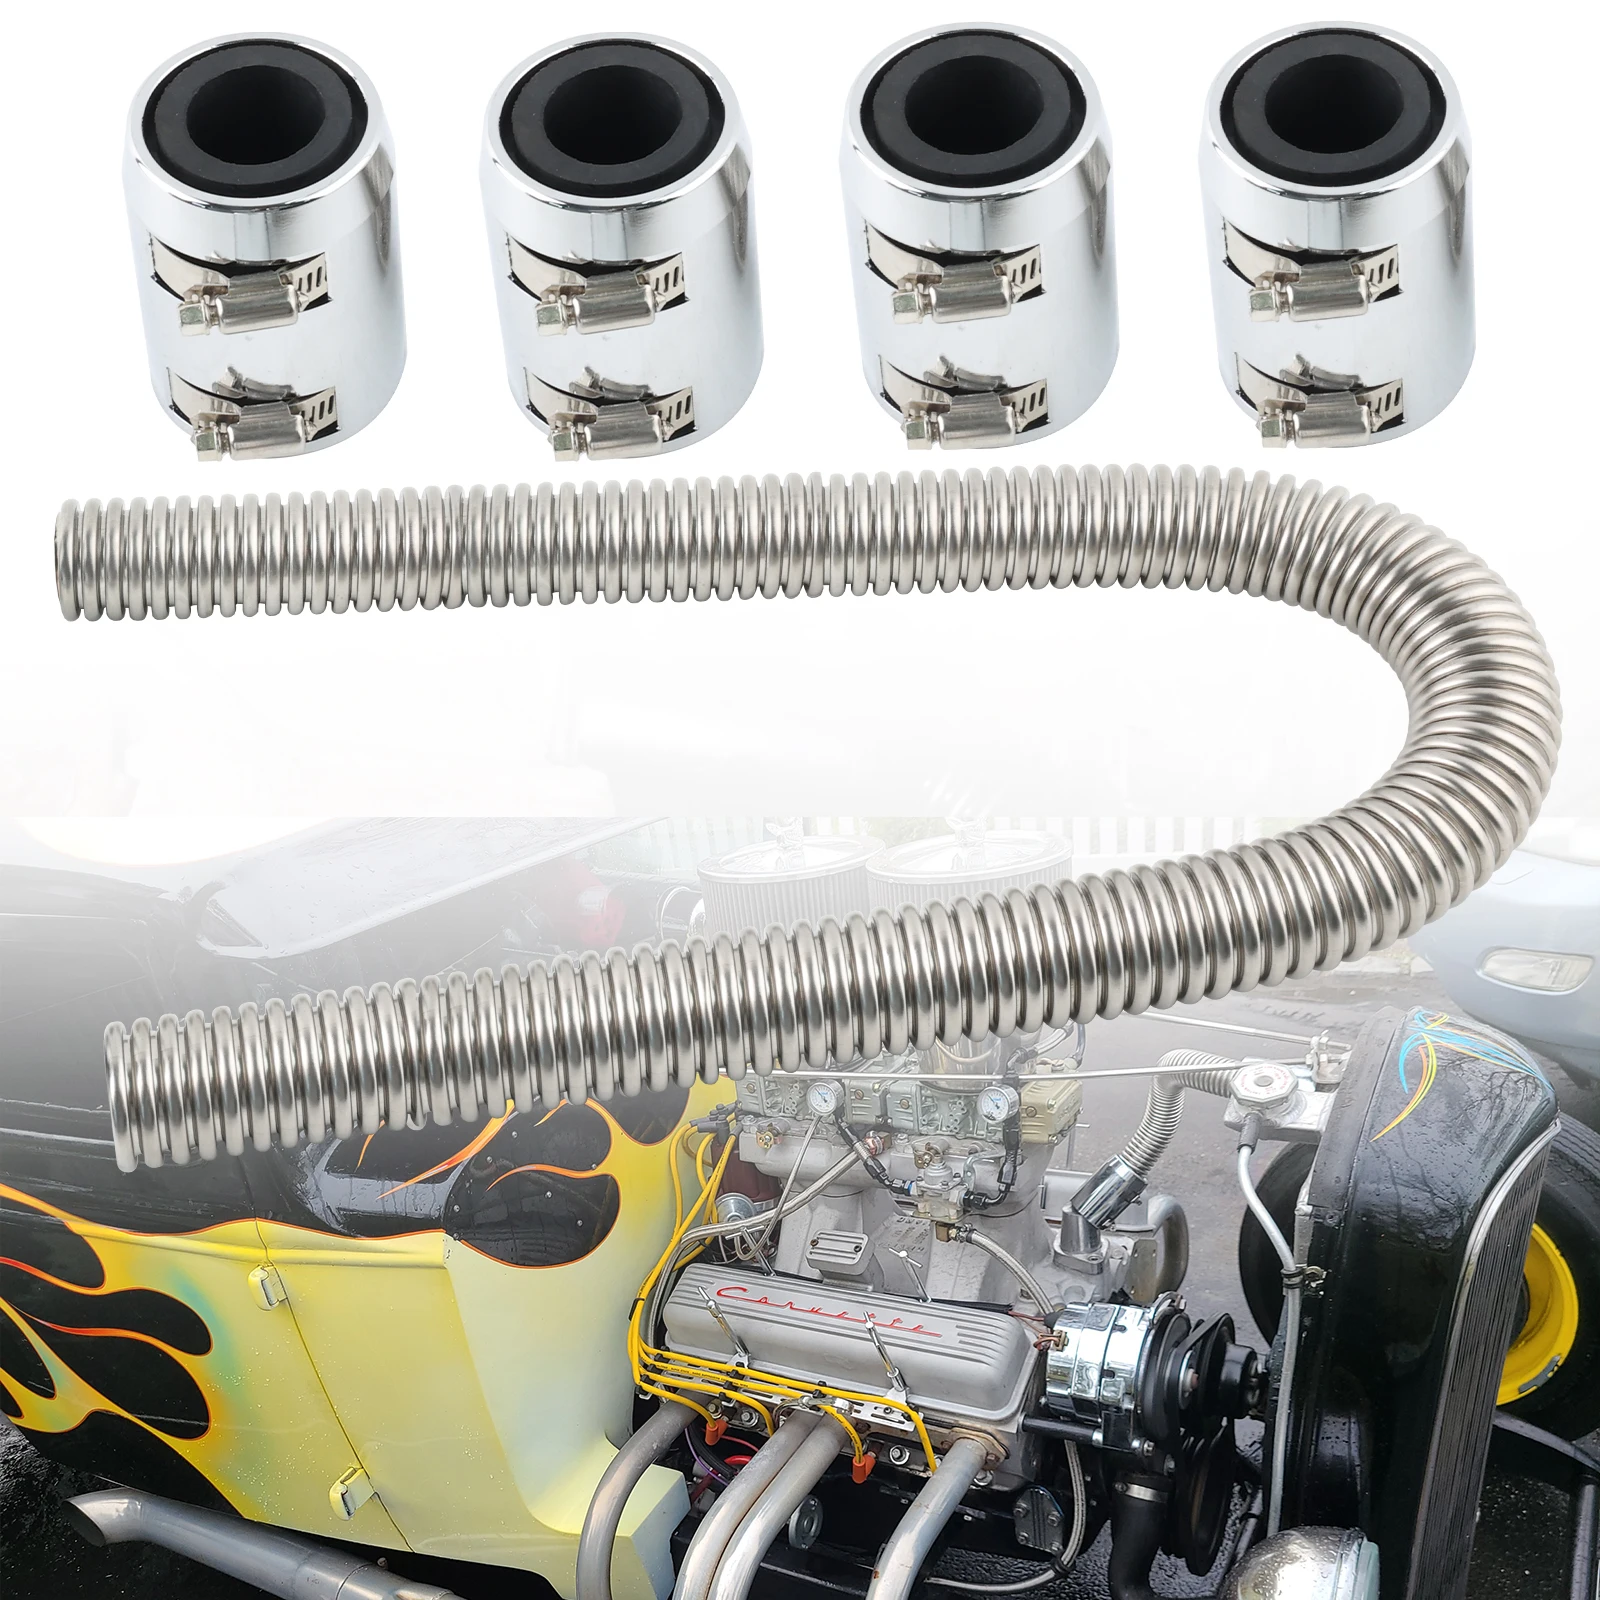 

Black Silvery 48" Stainless Steel Radiator Flexible Coolant Water Hose Kit with Caps Universal Fit For Most Car